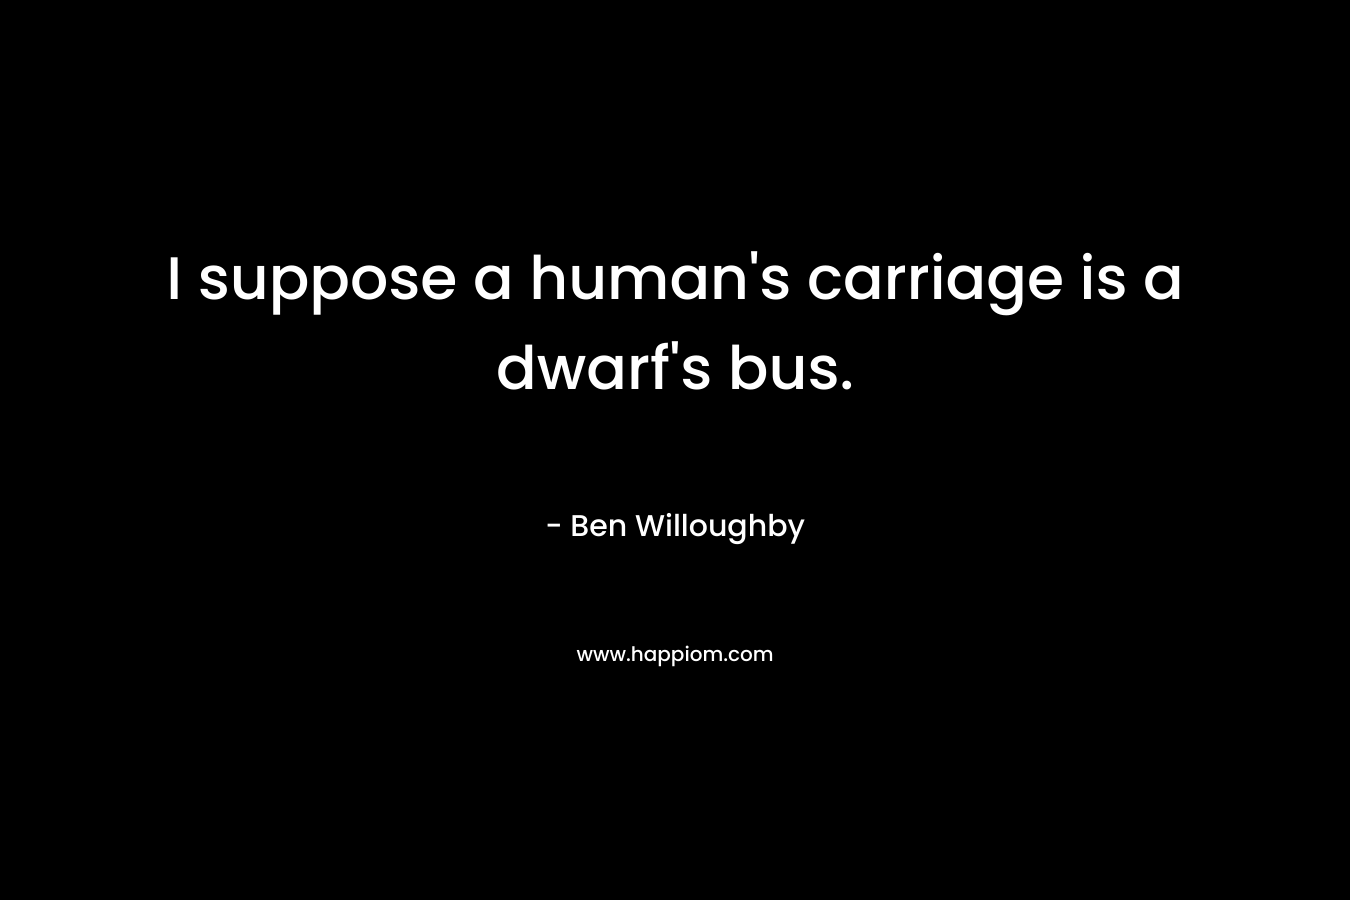 I suppose a human’s carriage is a dwarf’s bus. – Ben Willoughby